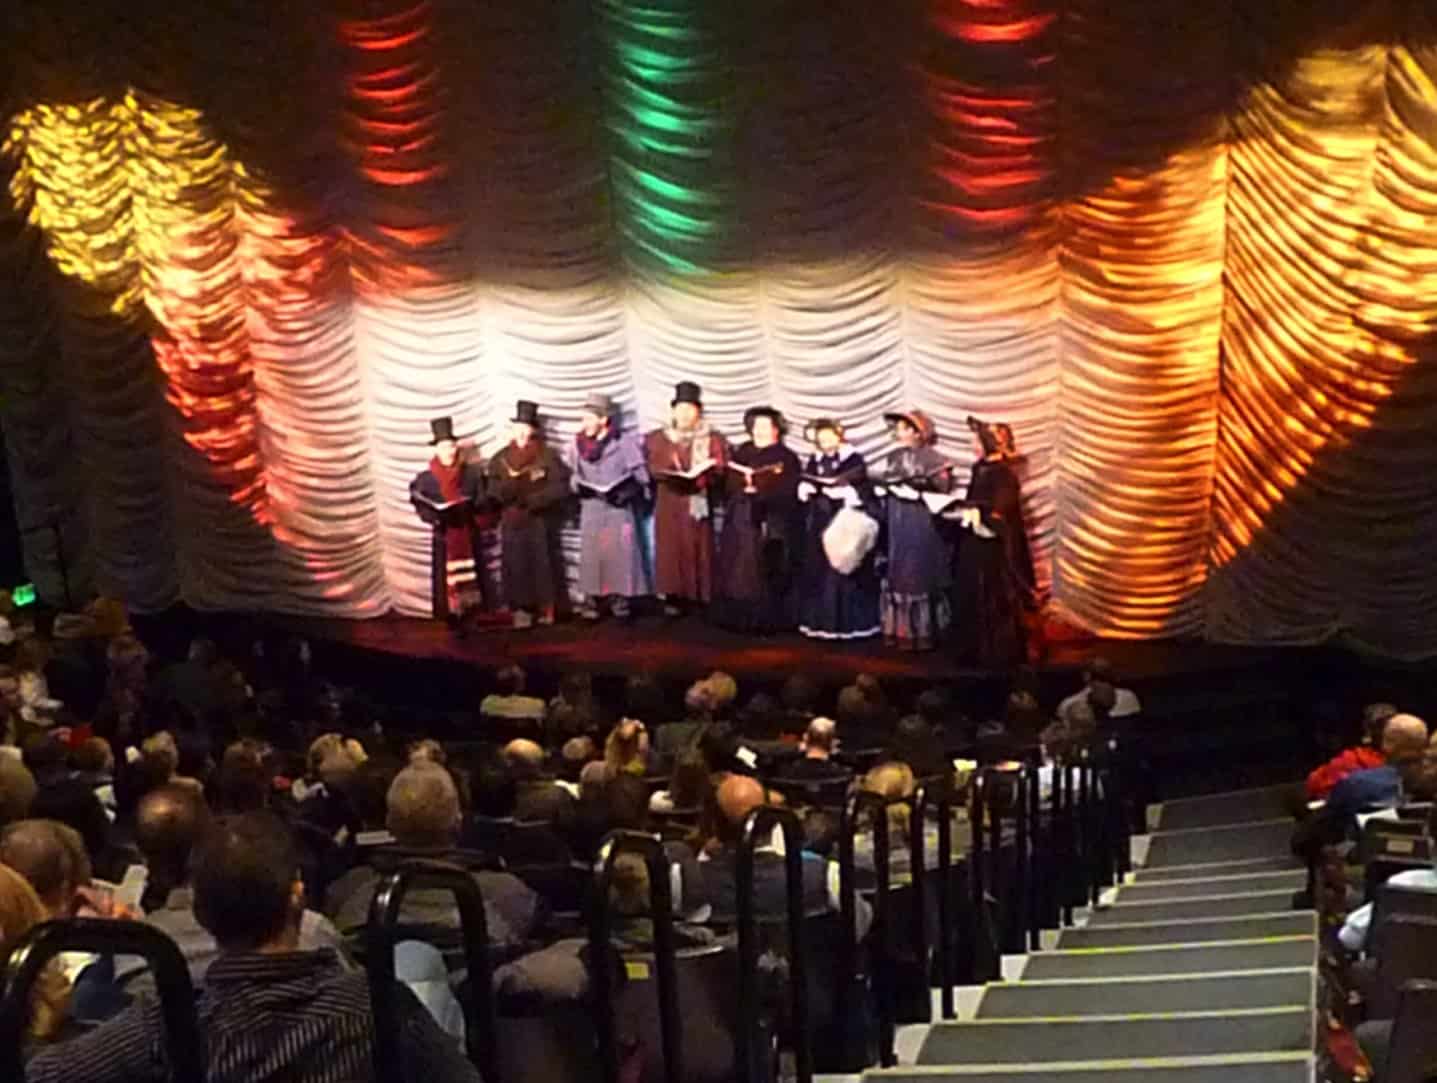 Dickens Christmas Carolers sing to the audience at the Meadowbrook Theatre